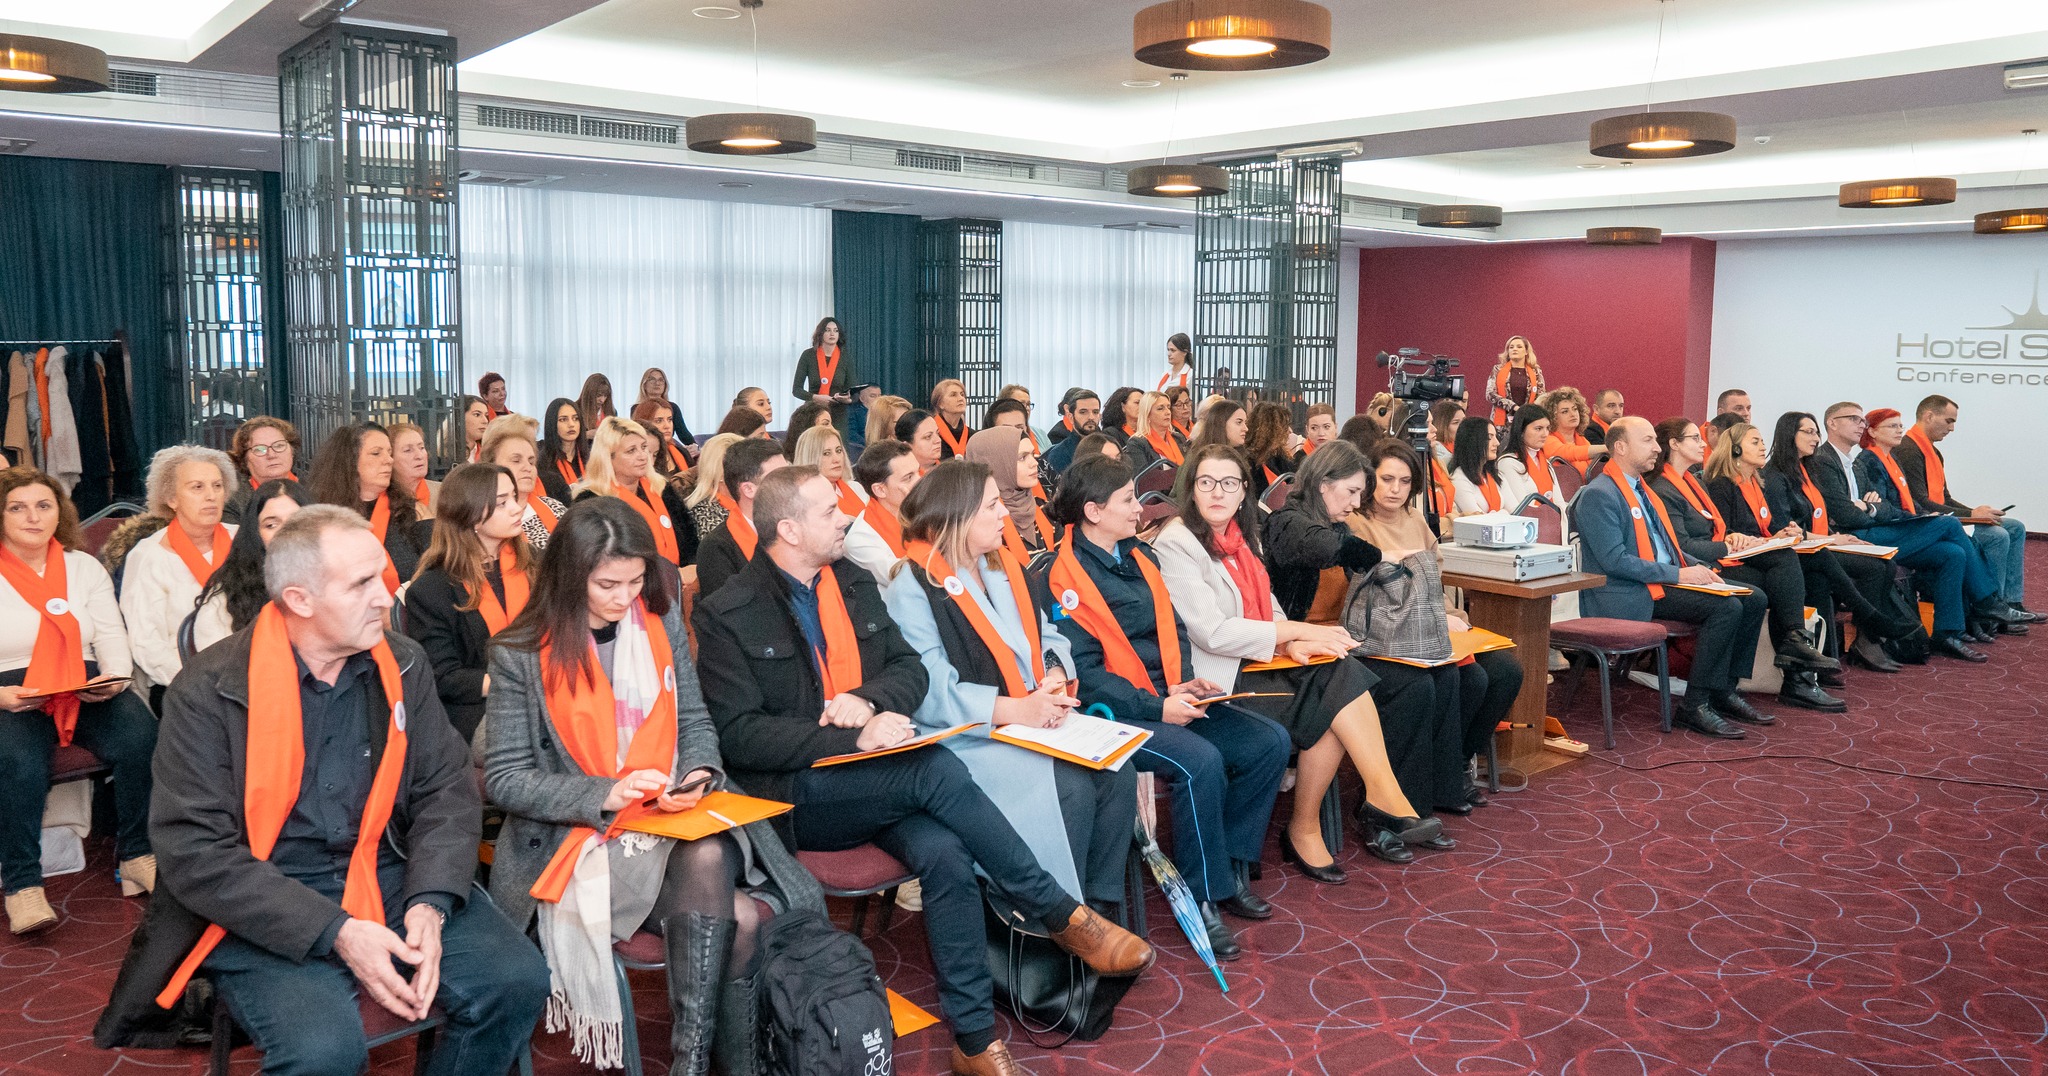 Kosova Women 4 Women in cooperation with the University of Prishtina, Department of Social Work and with the participation of experts from various fields engaged in the promotion of equality, held the conference “Policies in action against gender-based violence”